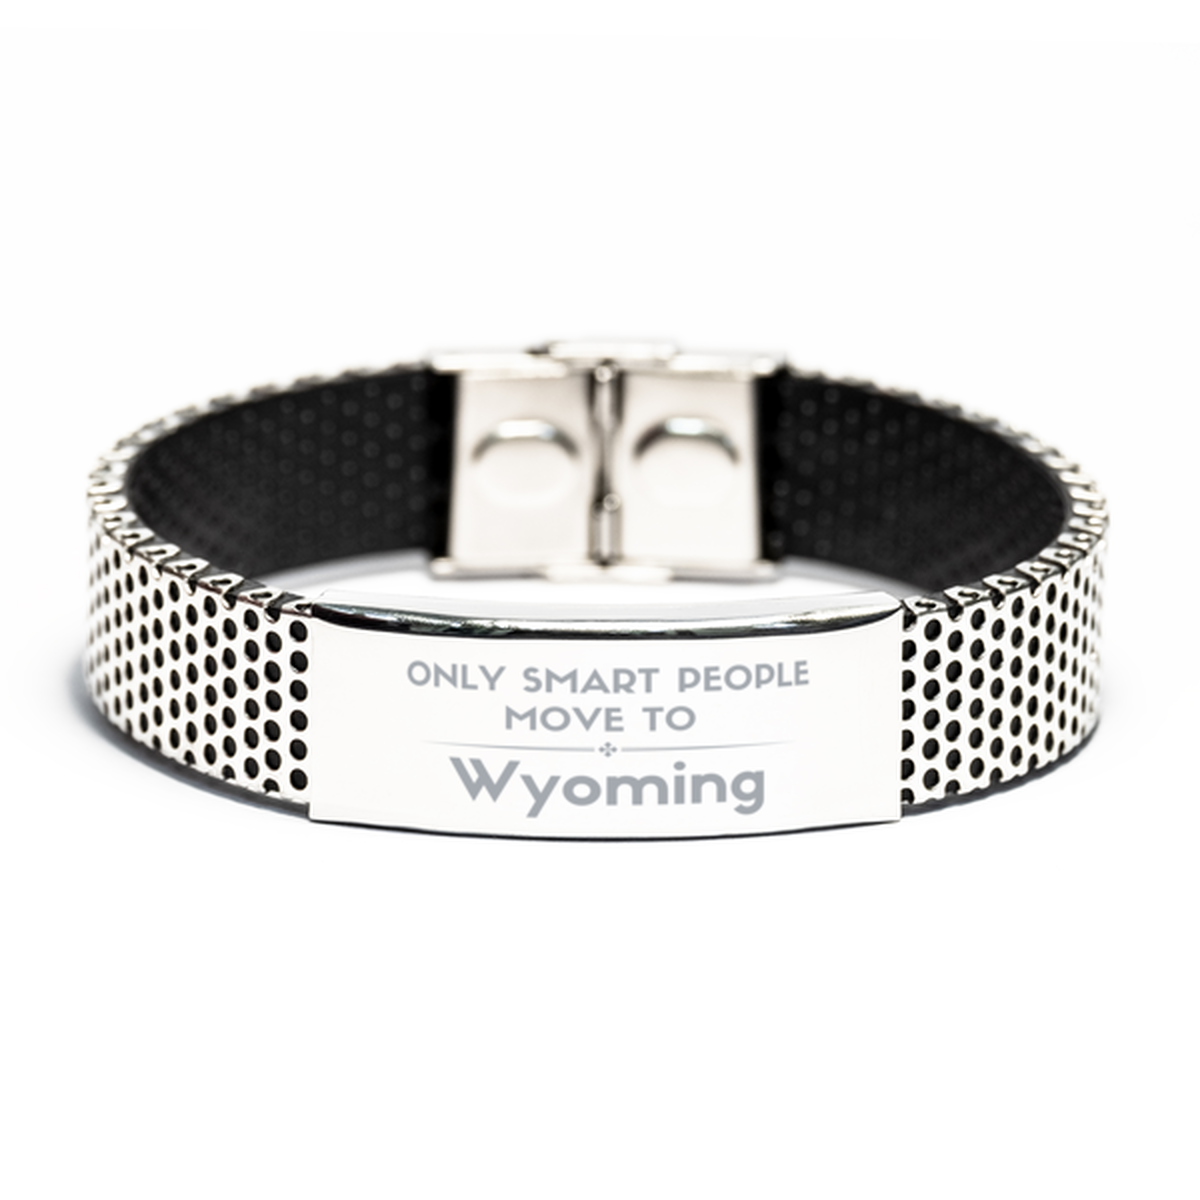 Only smart people move to Wyoming Stainless Steel Bracelet, Gag Gifts For Wyoming, Move to Wyoming Gifts for Friends Coworker Funny Saying Quote